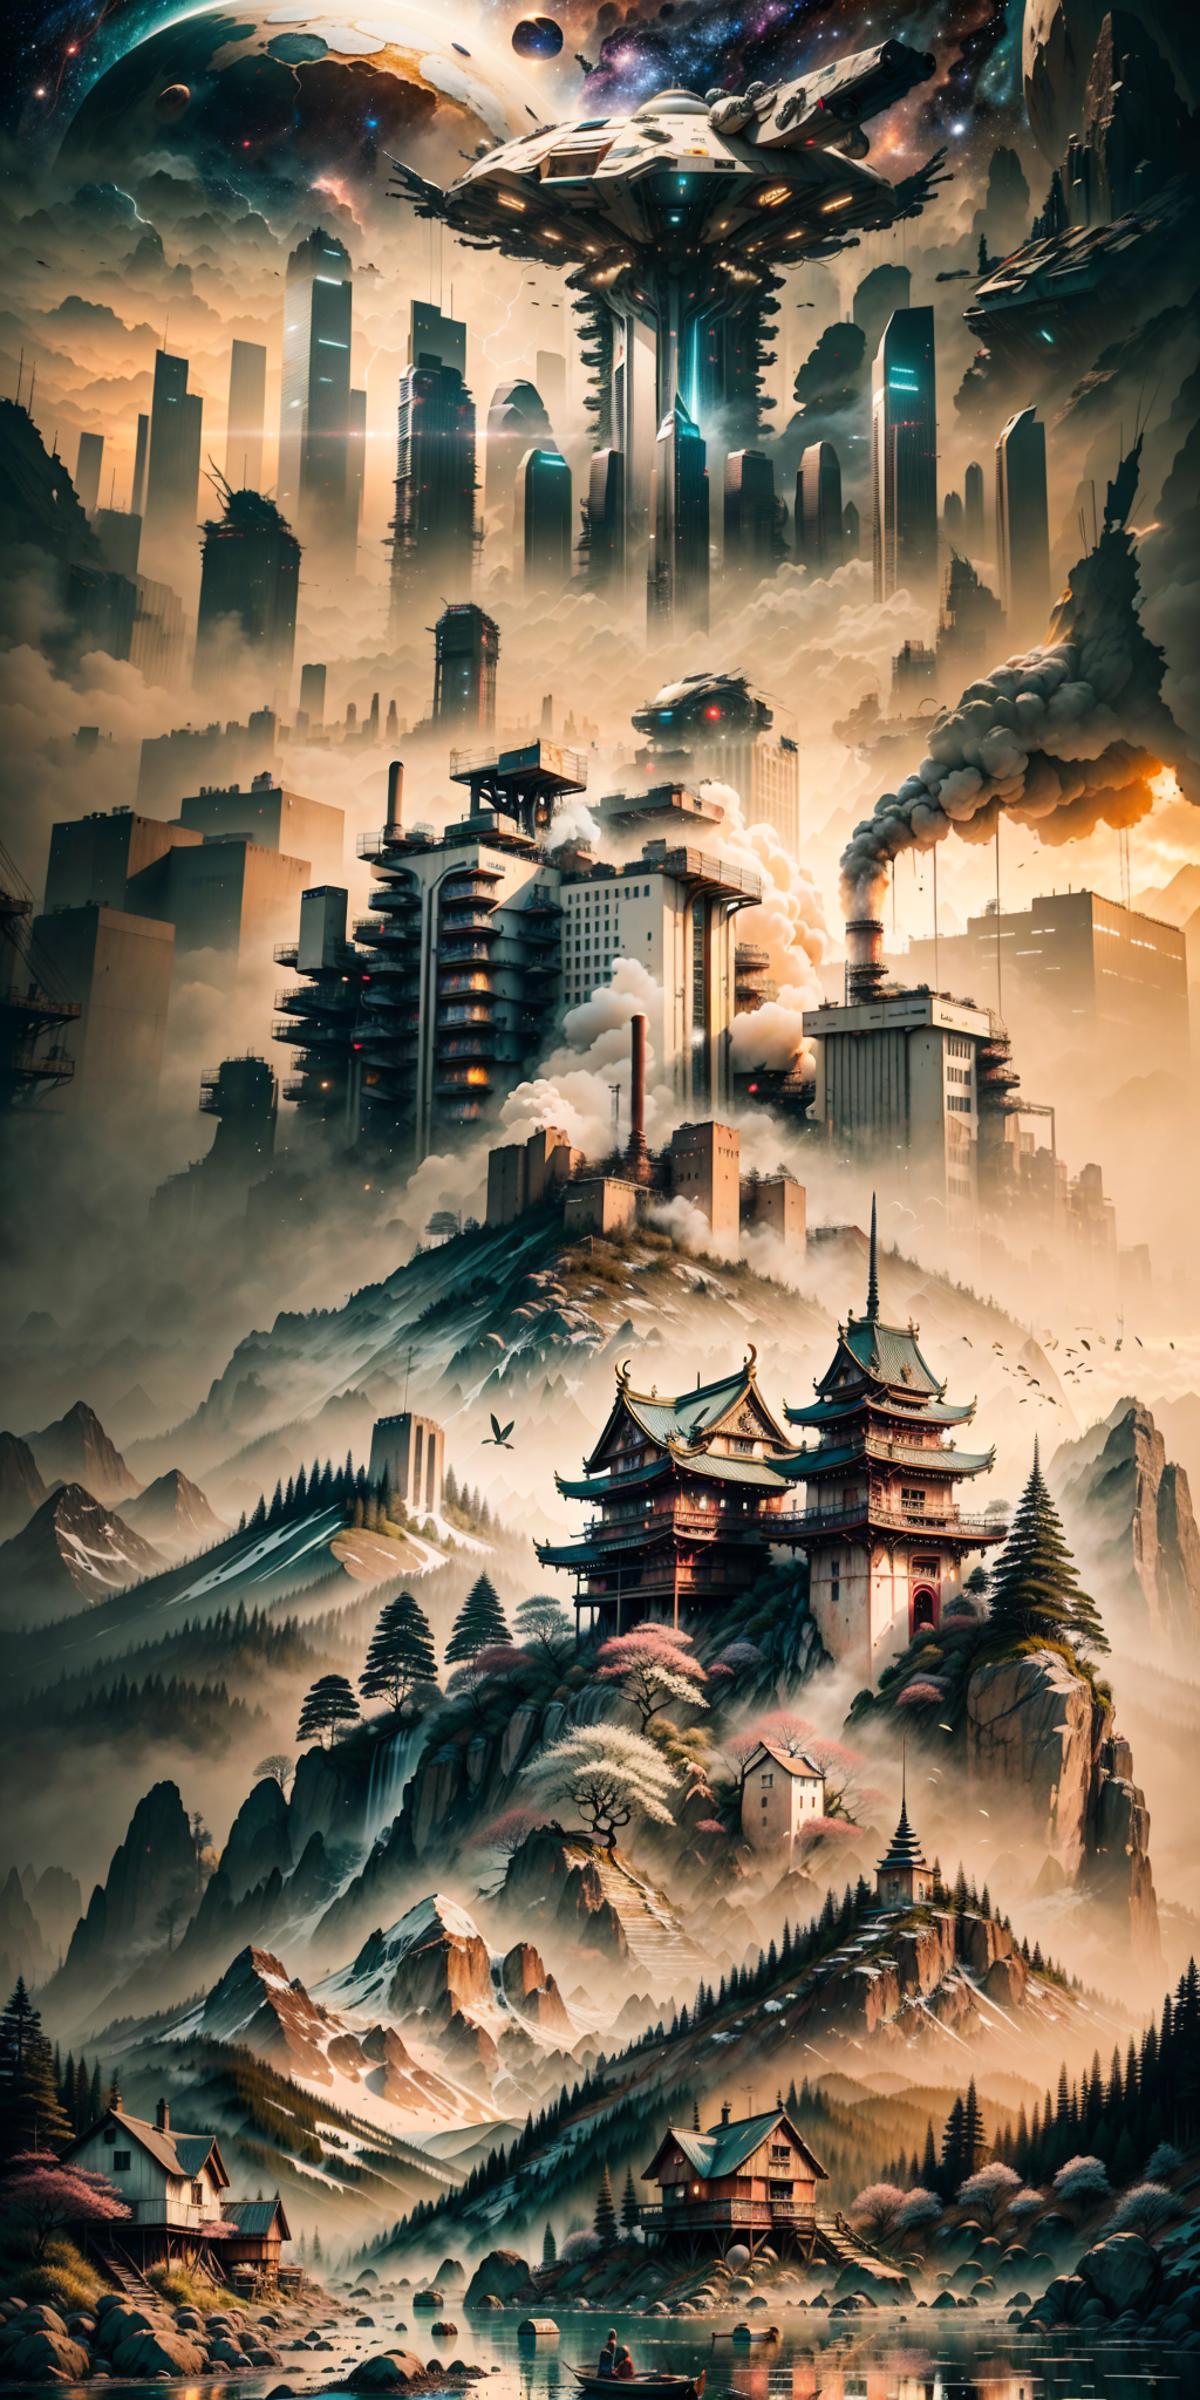 A beautiful painting of a cityscape with a large building, a castle, and a pagoda.